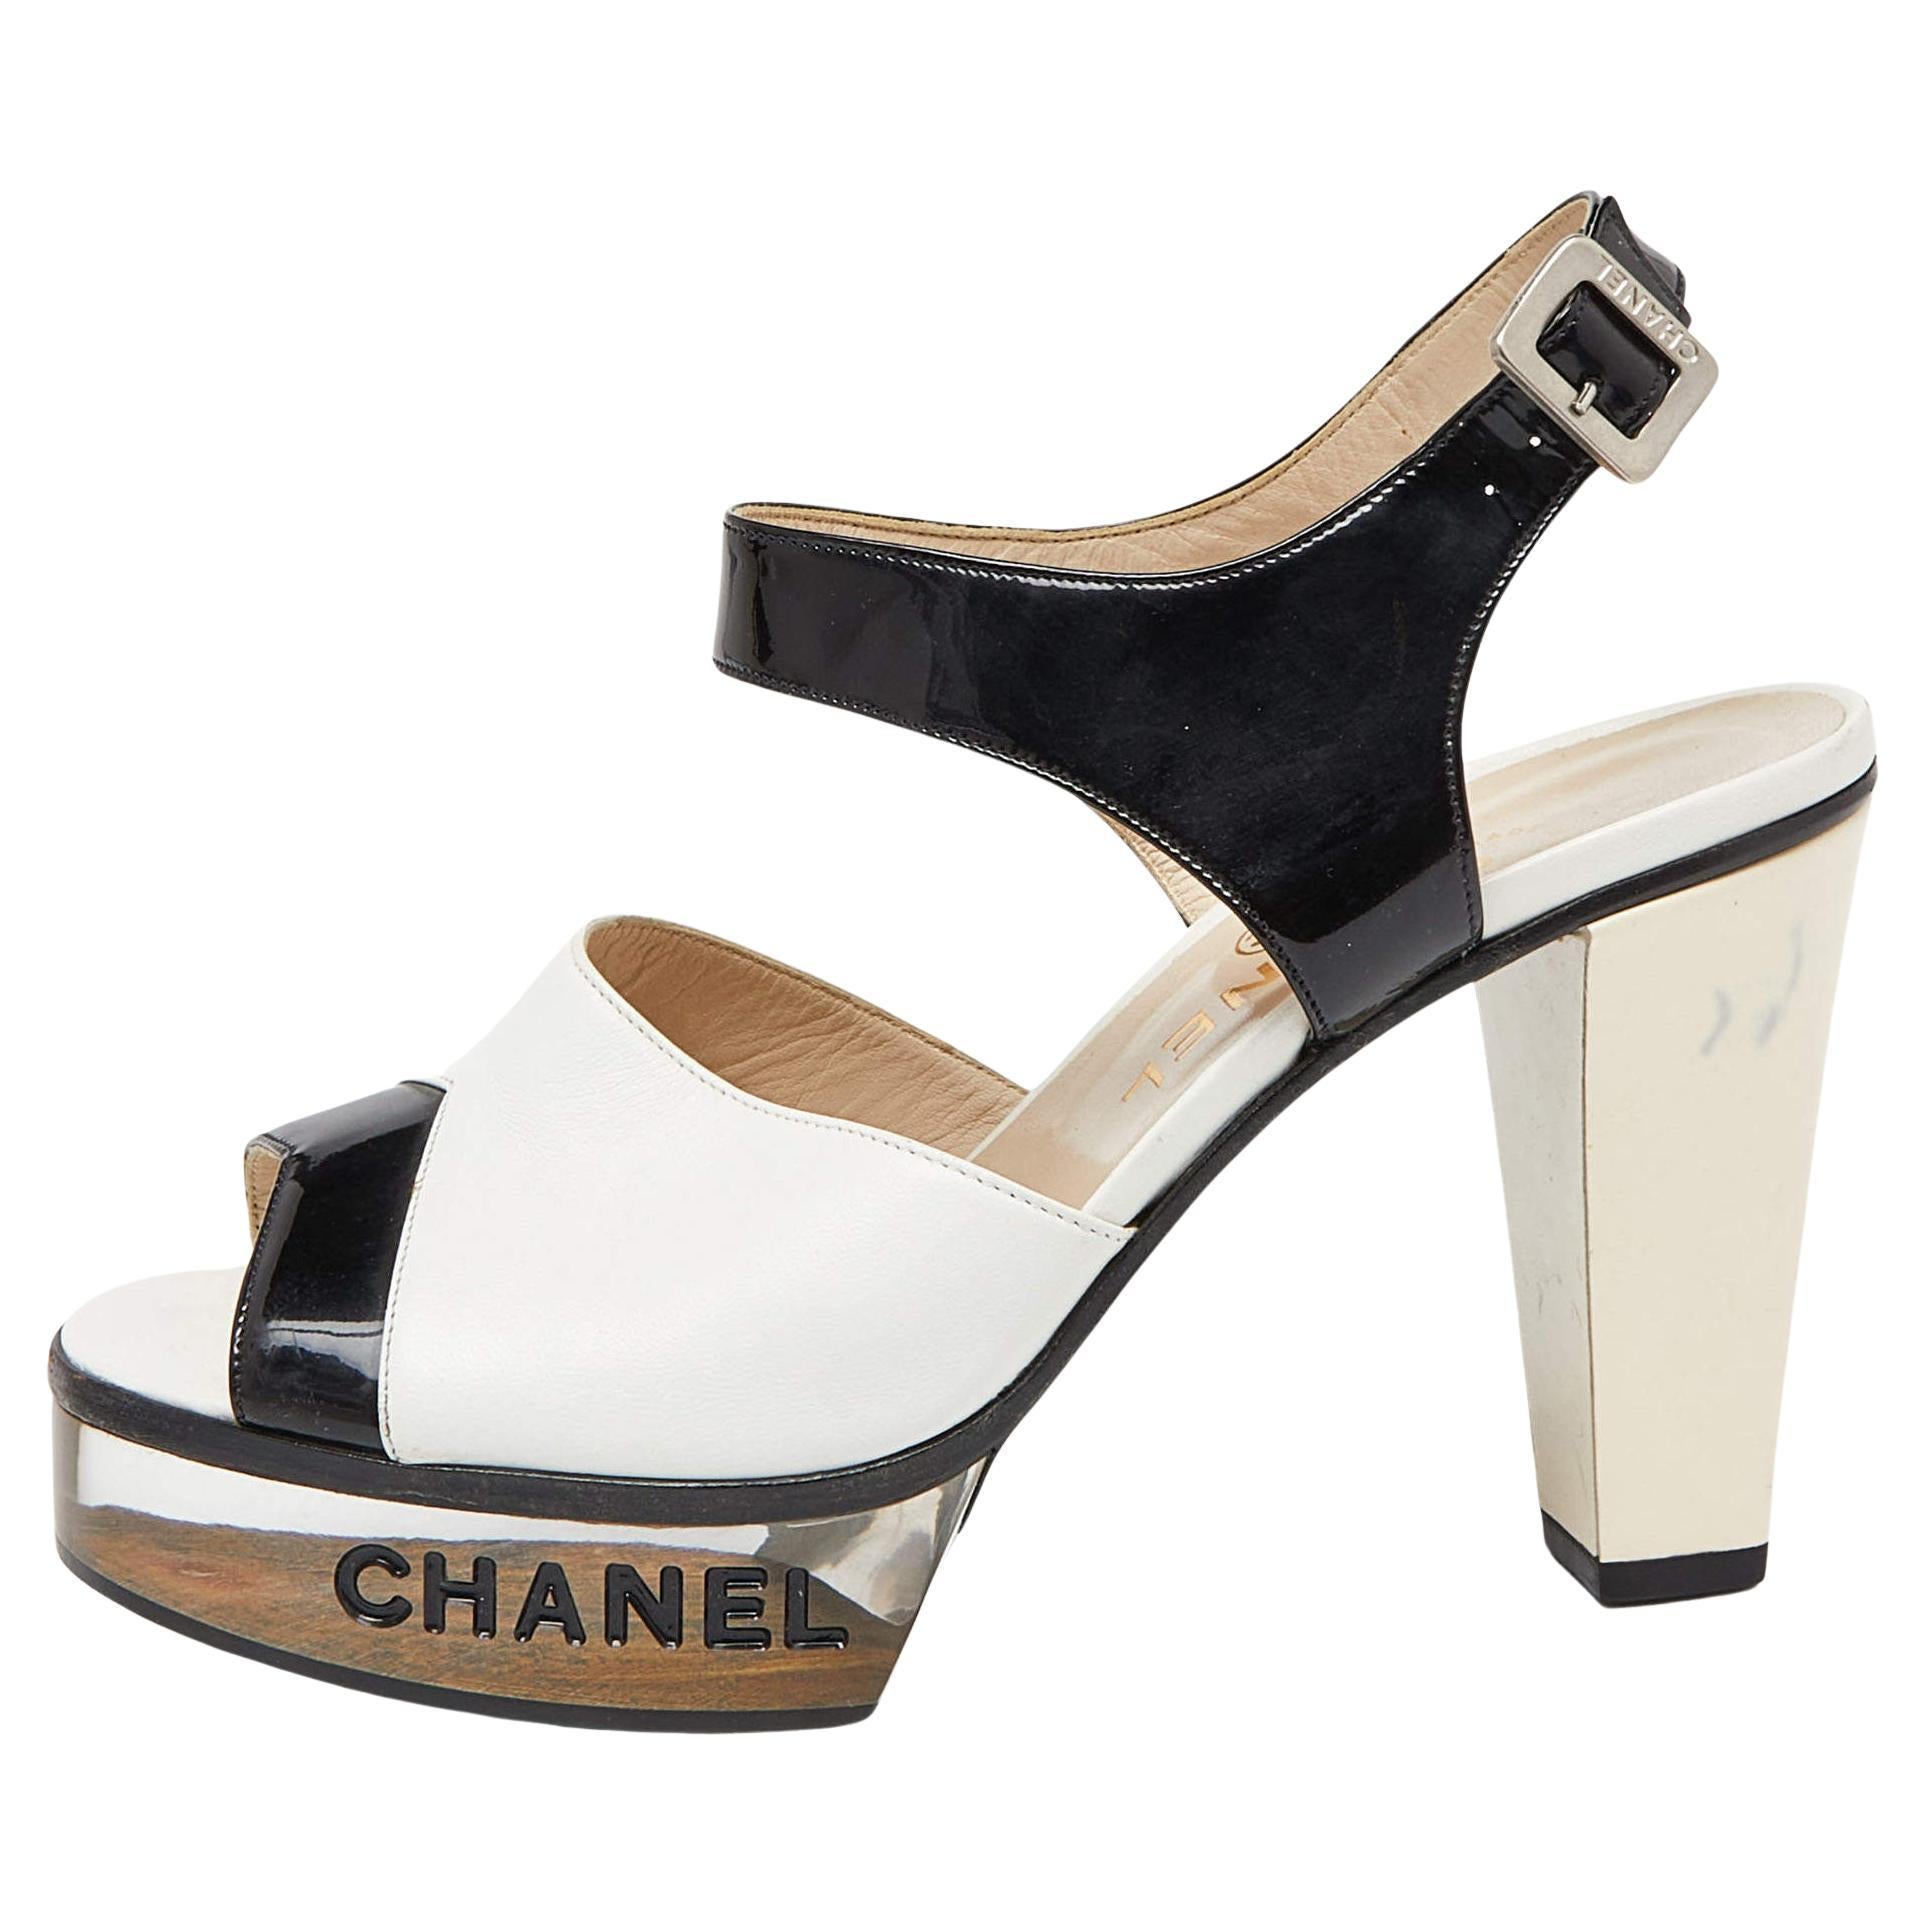 Chanel White/Black Leather and Patent Platform Ankle Strap Sandals Size 37.5